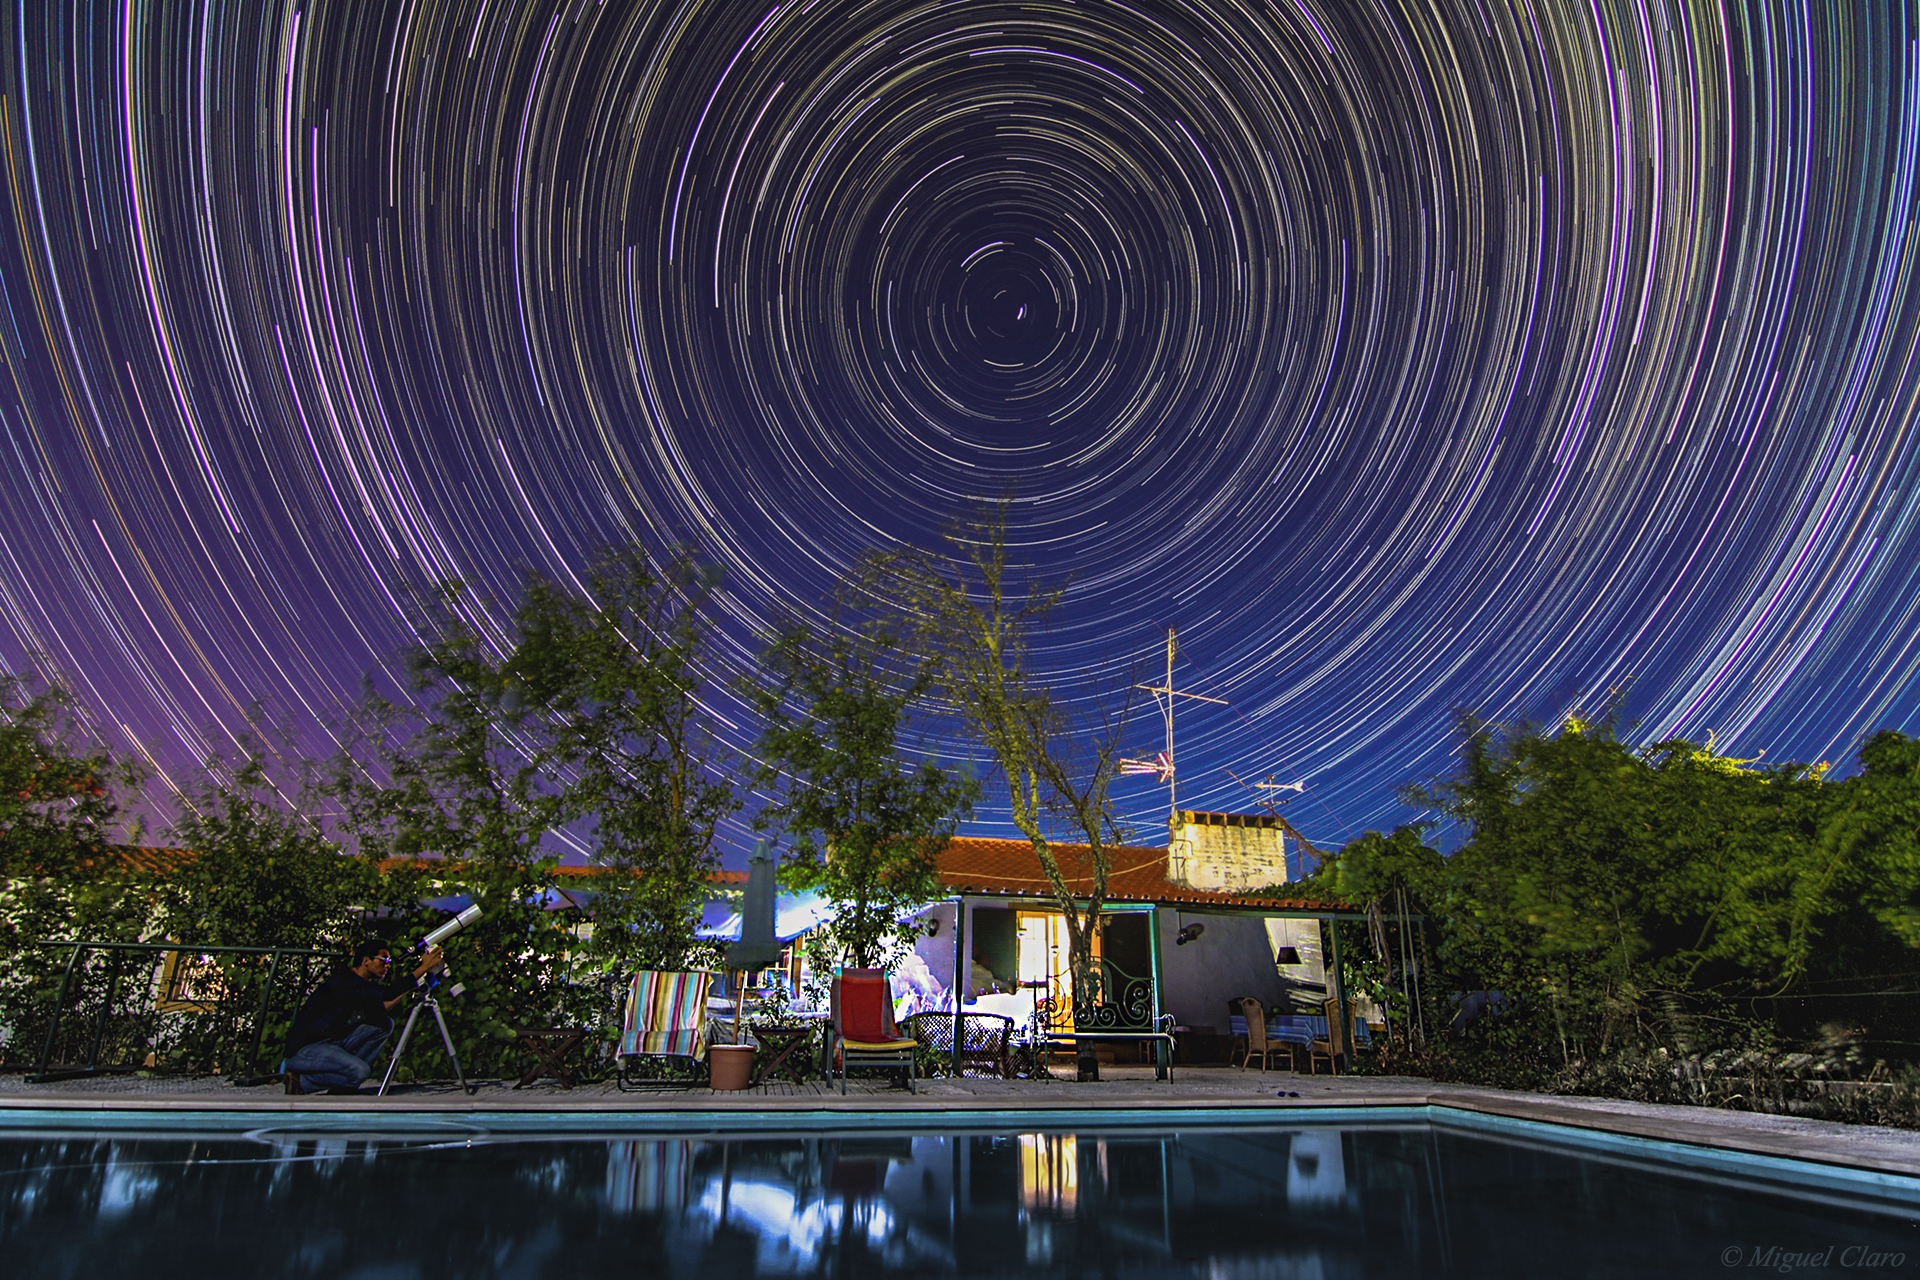 men, Miguel Claro, Architecture, Building, House, Swimming pool, Star trails, Night, Trees, Long exposure, Telescope, Portugal, Circle, Reflection Wallpaper